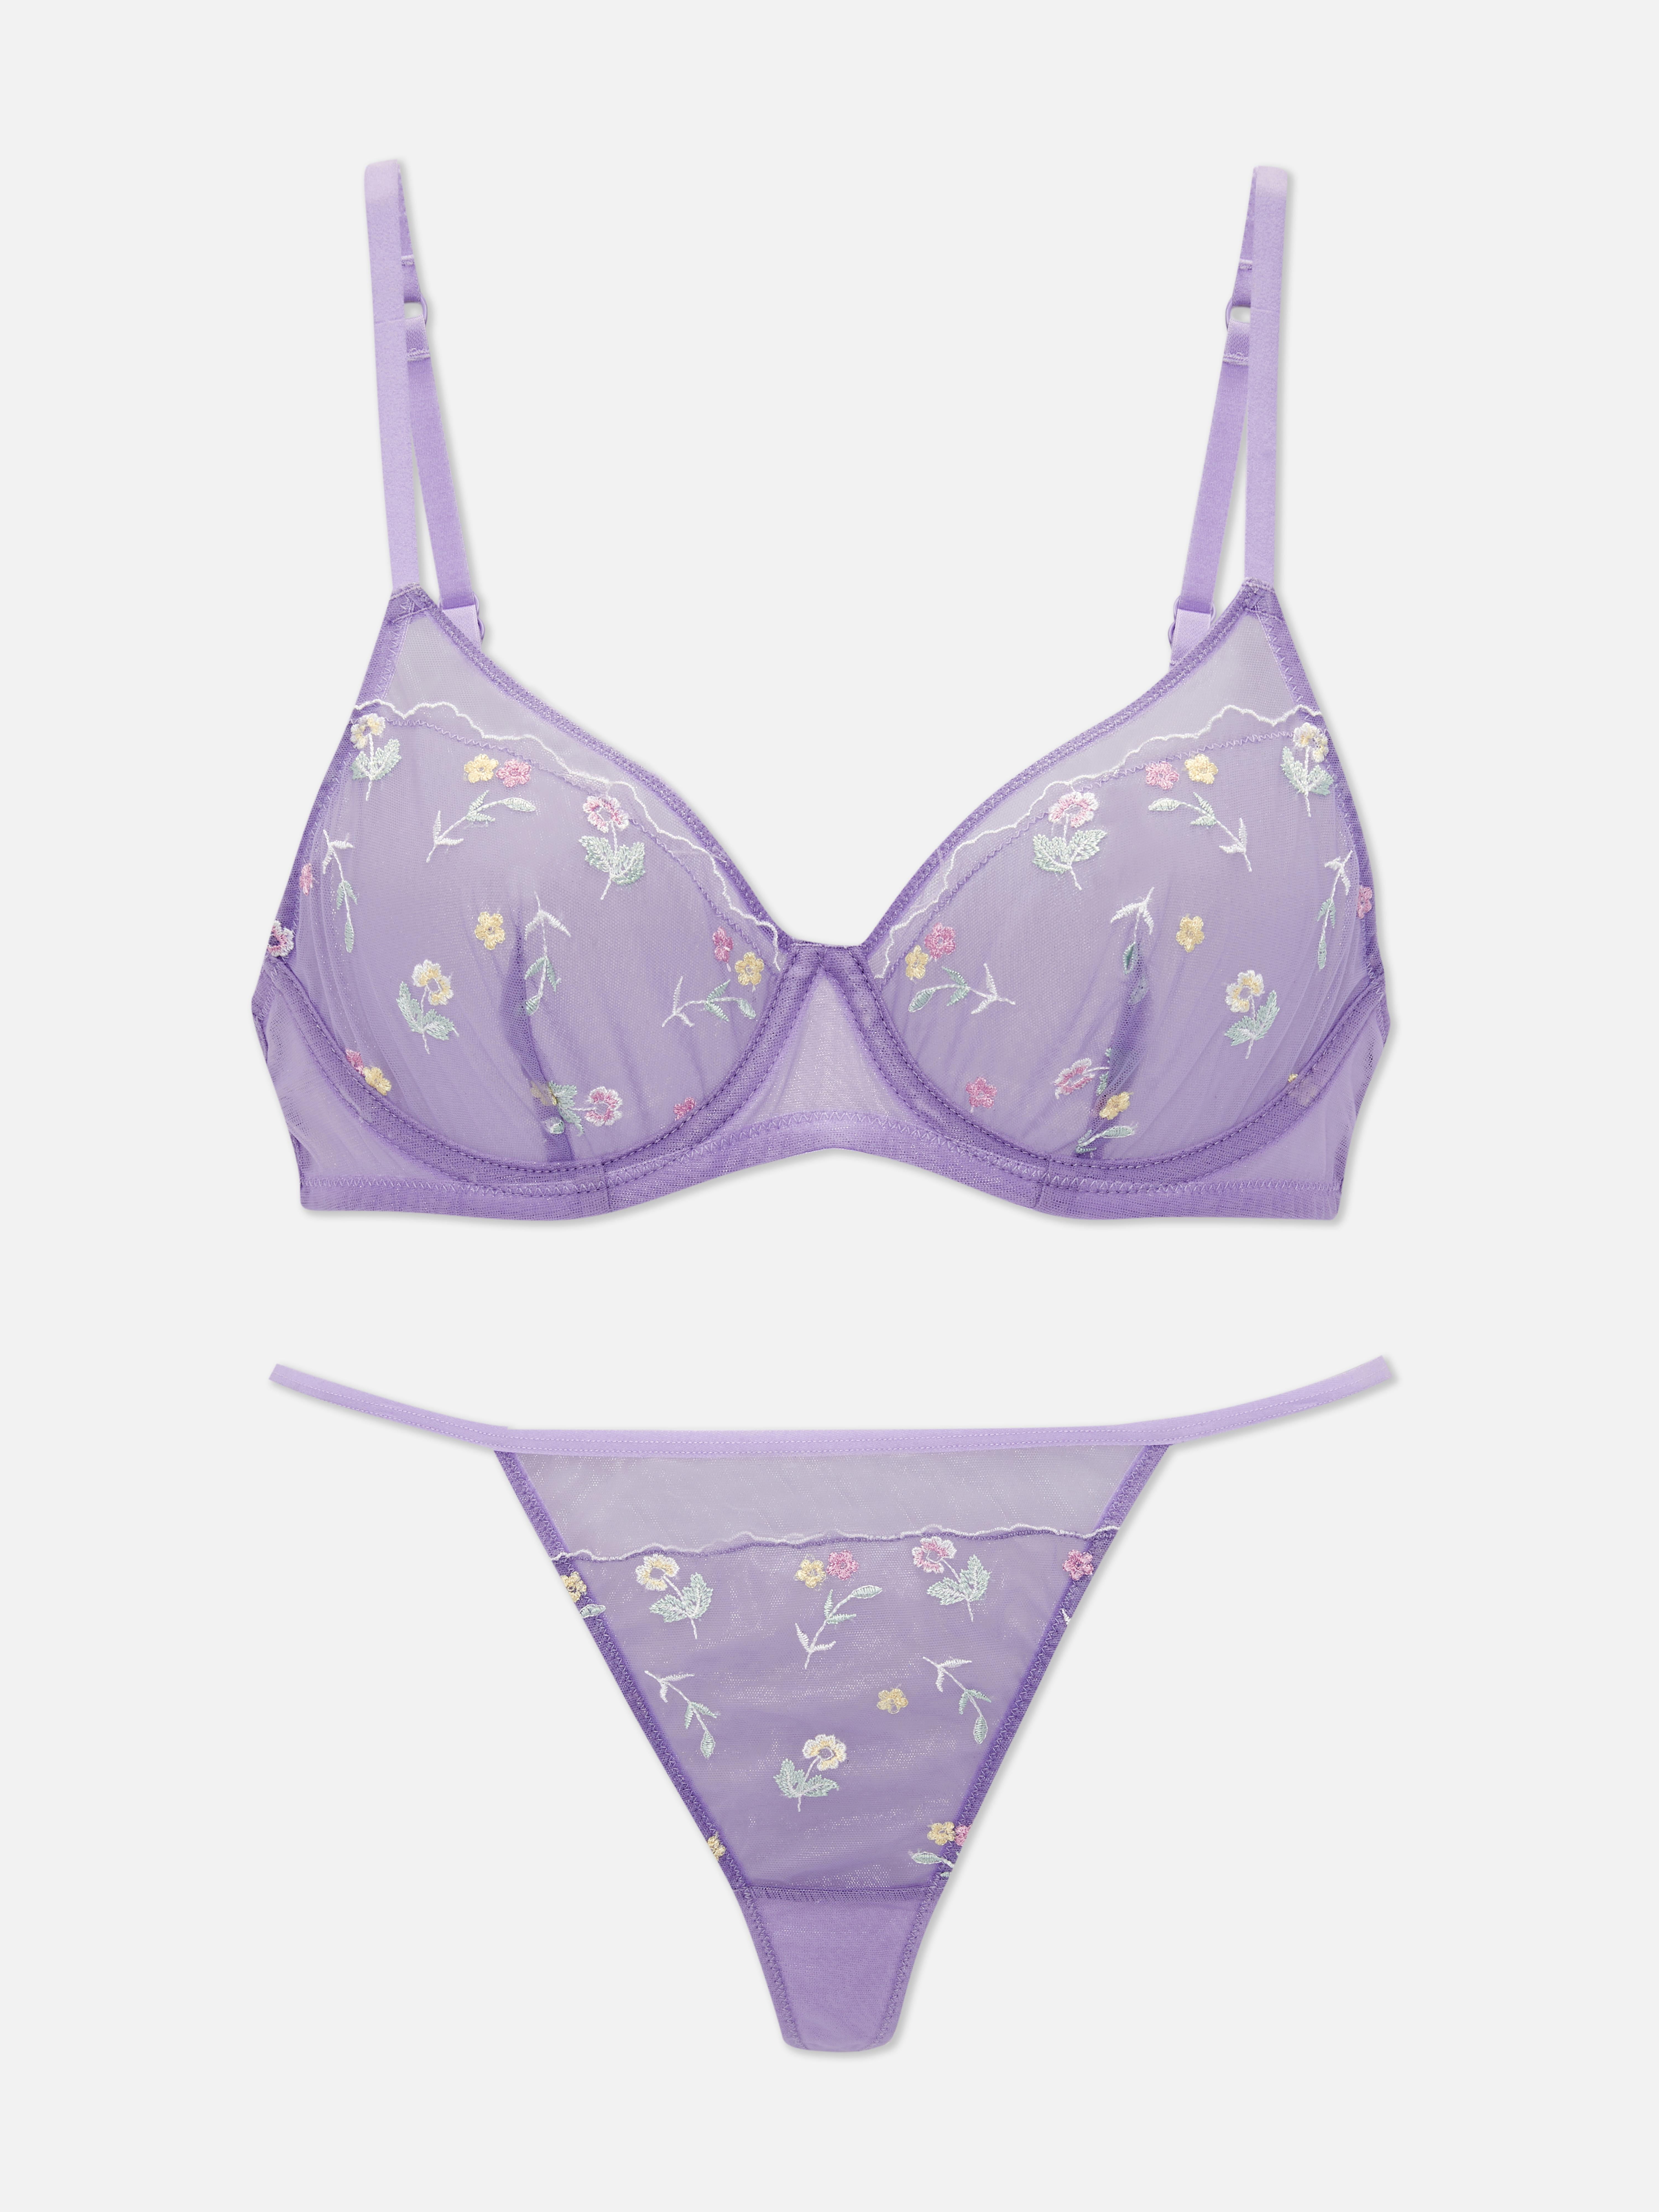 New PRIMARK MAXIMISE+2 CUP SIZES FABULOUSLY SEXY PURPLE LACE LONG-LINE BRA  SET